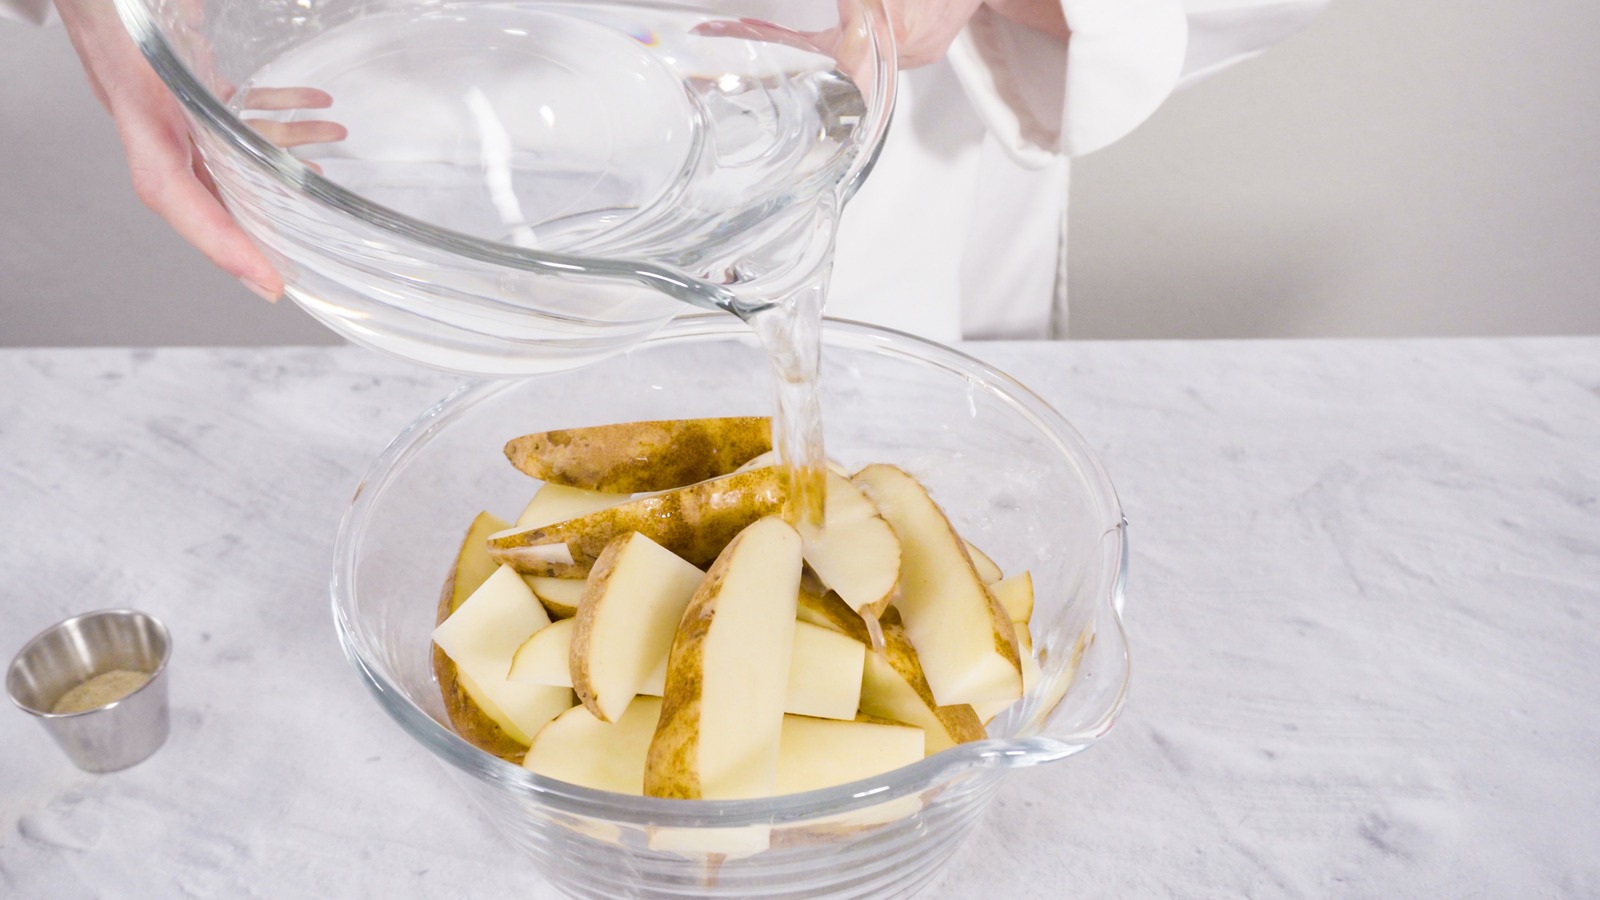 How long to soak potatoes for the crispiest fries possible